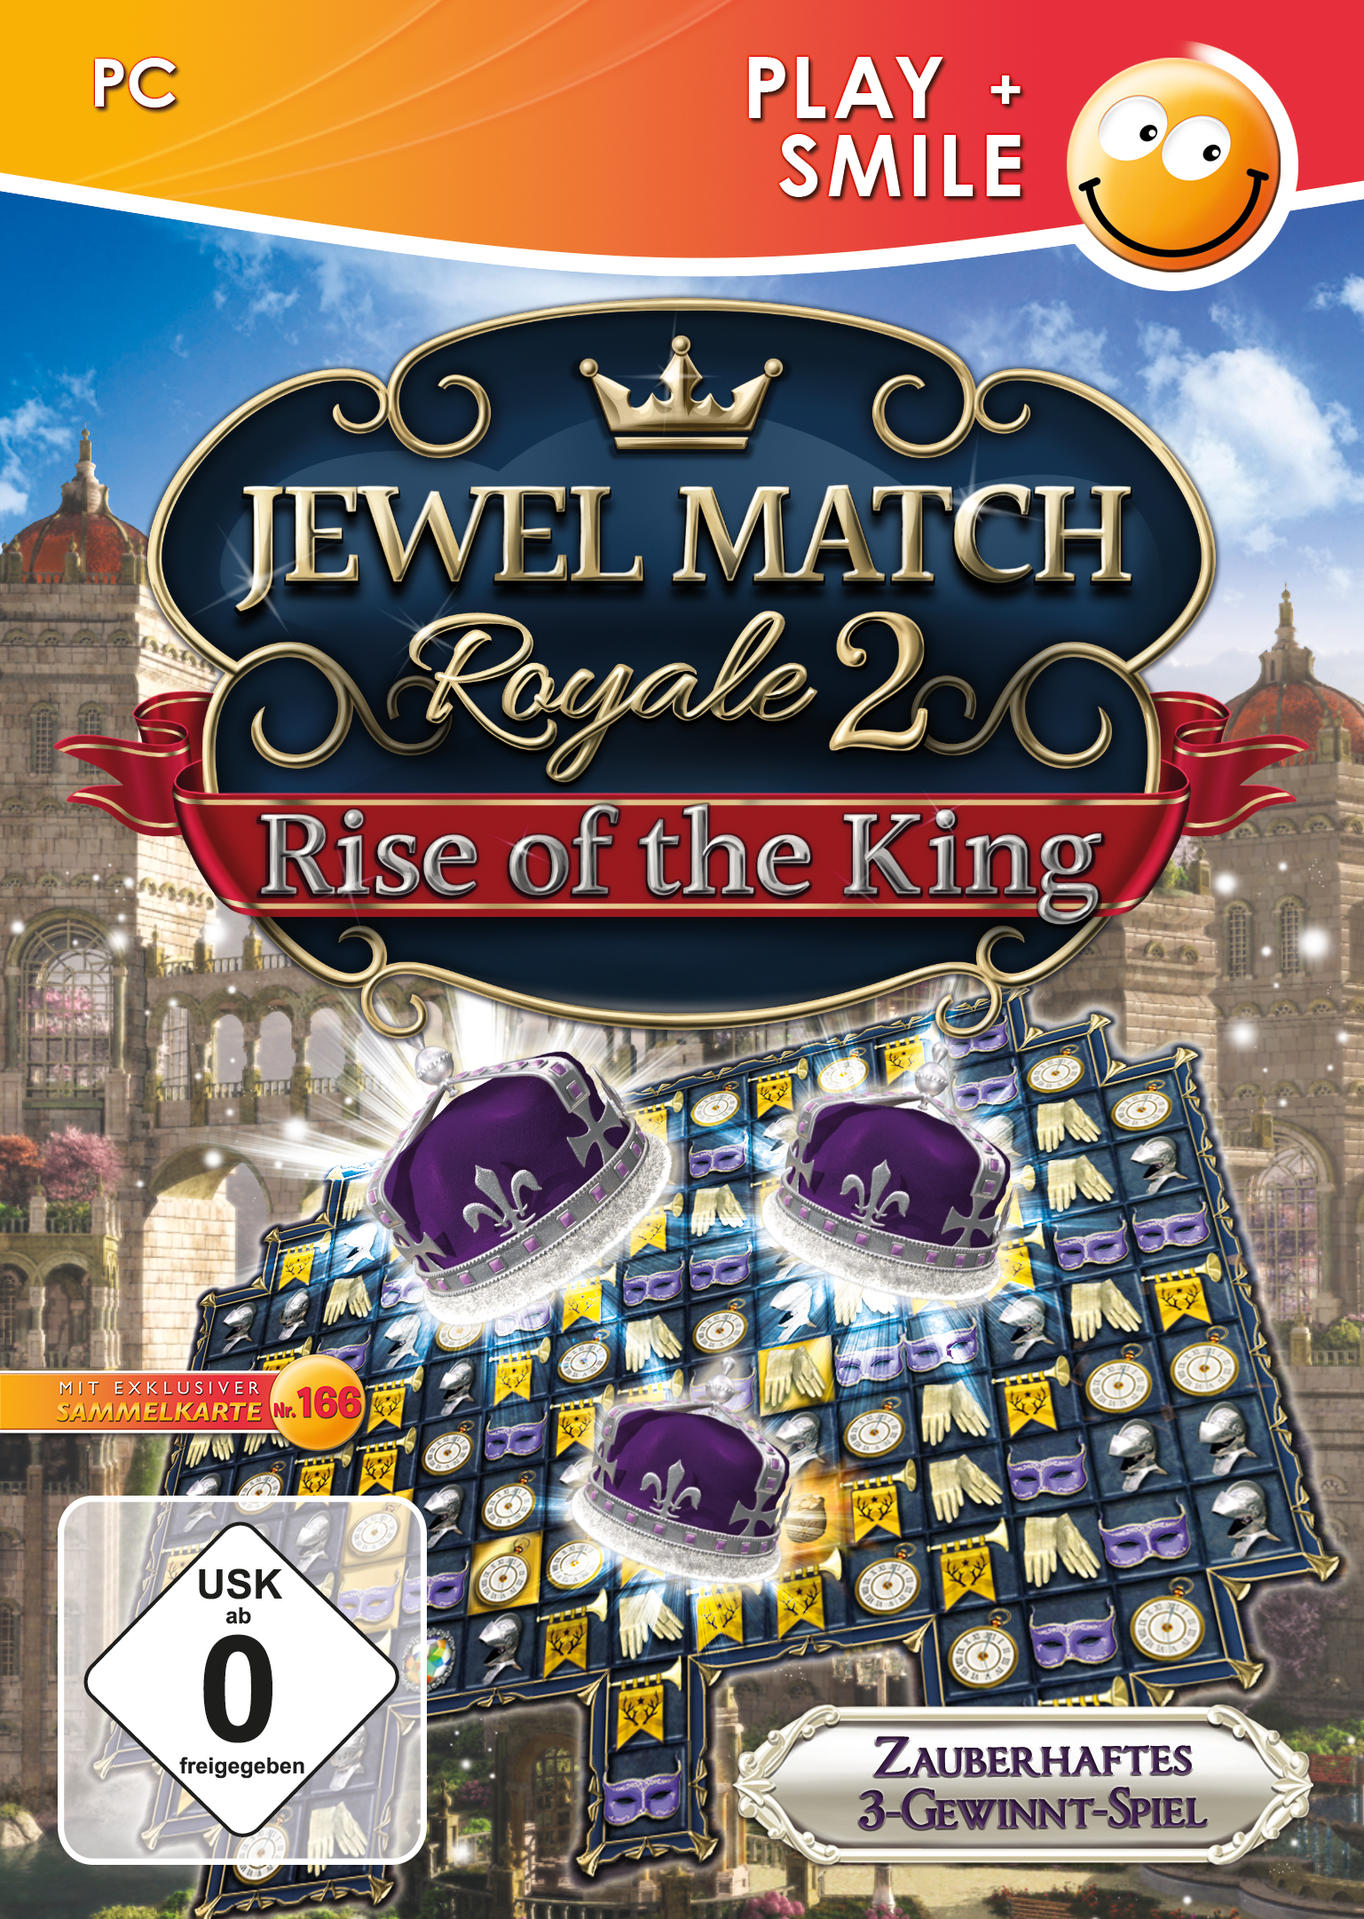 2: - Match Rise [PC] Royale the Jewel of King